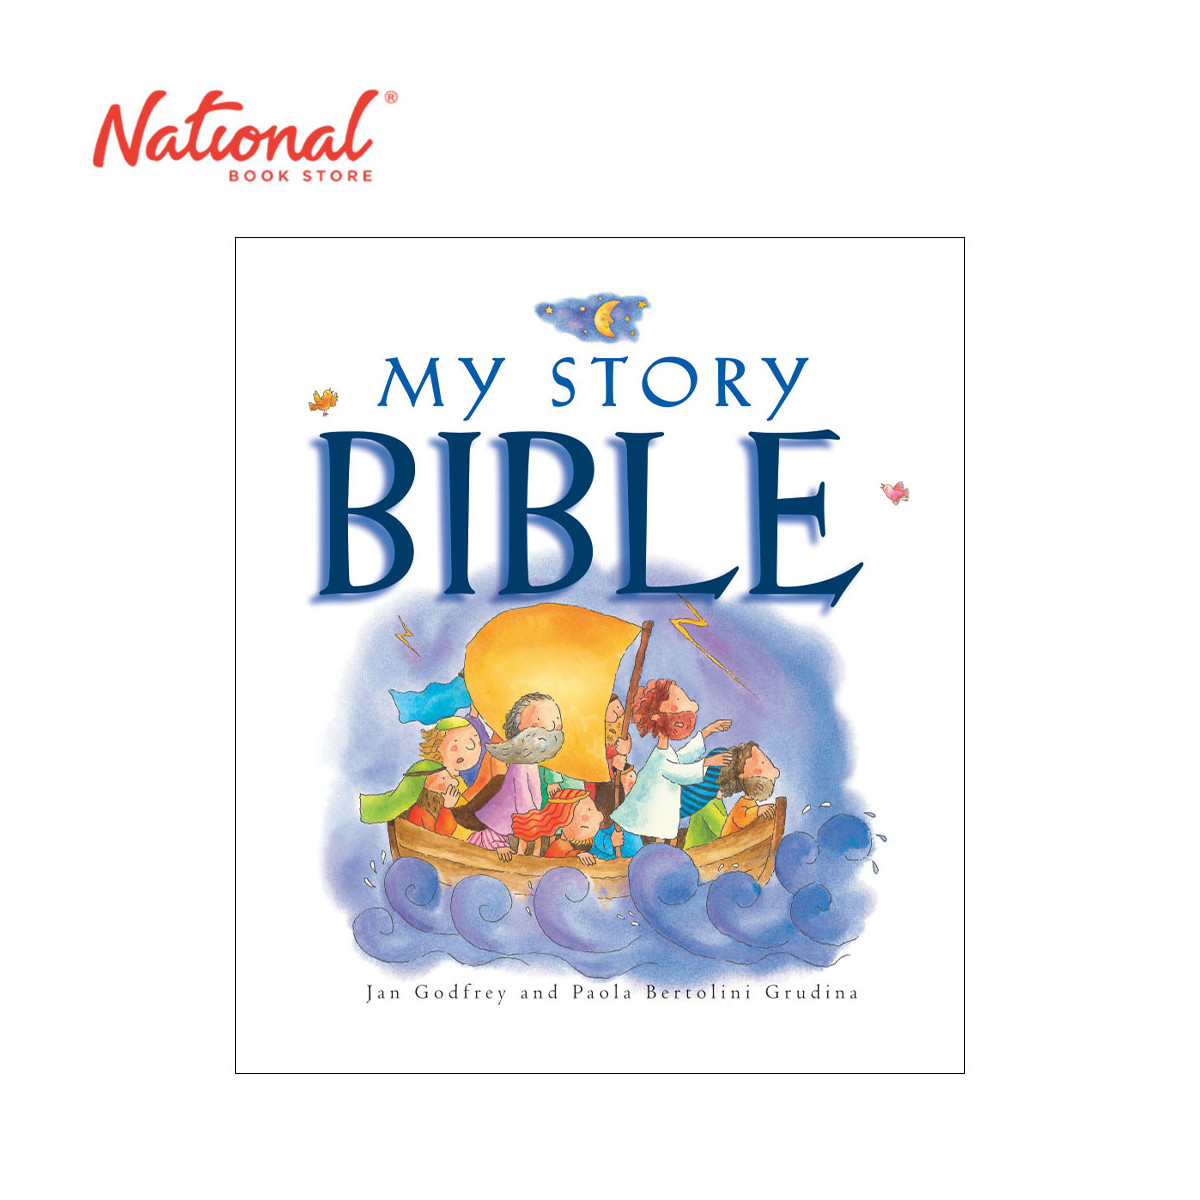 My Story Bible - Trade Paperback - Bible Stories for Kids